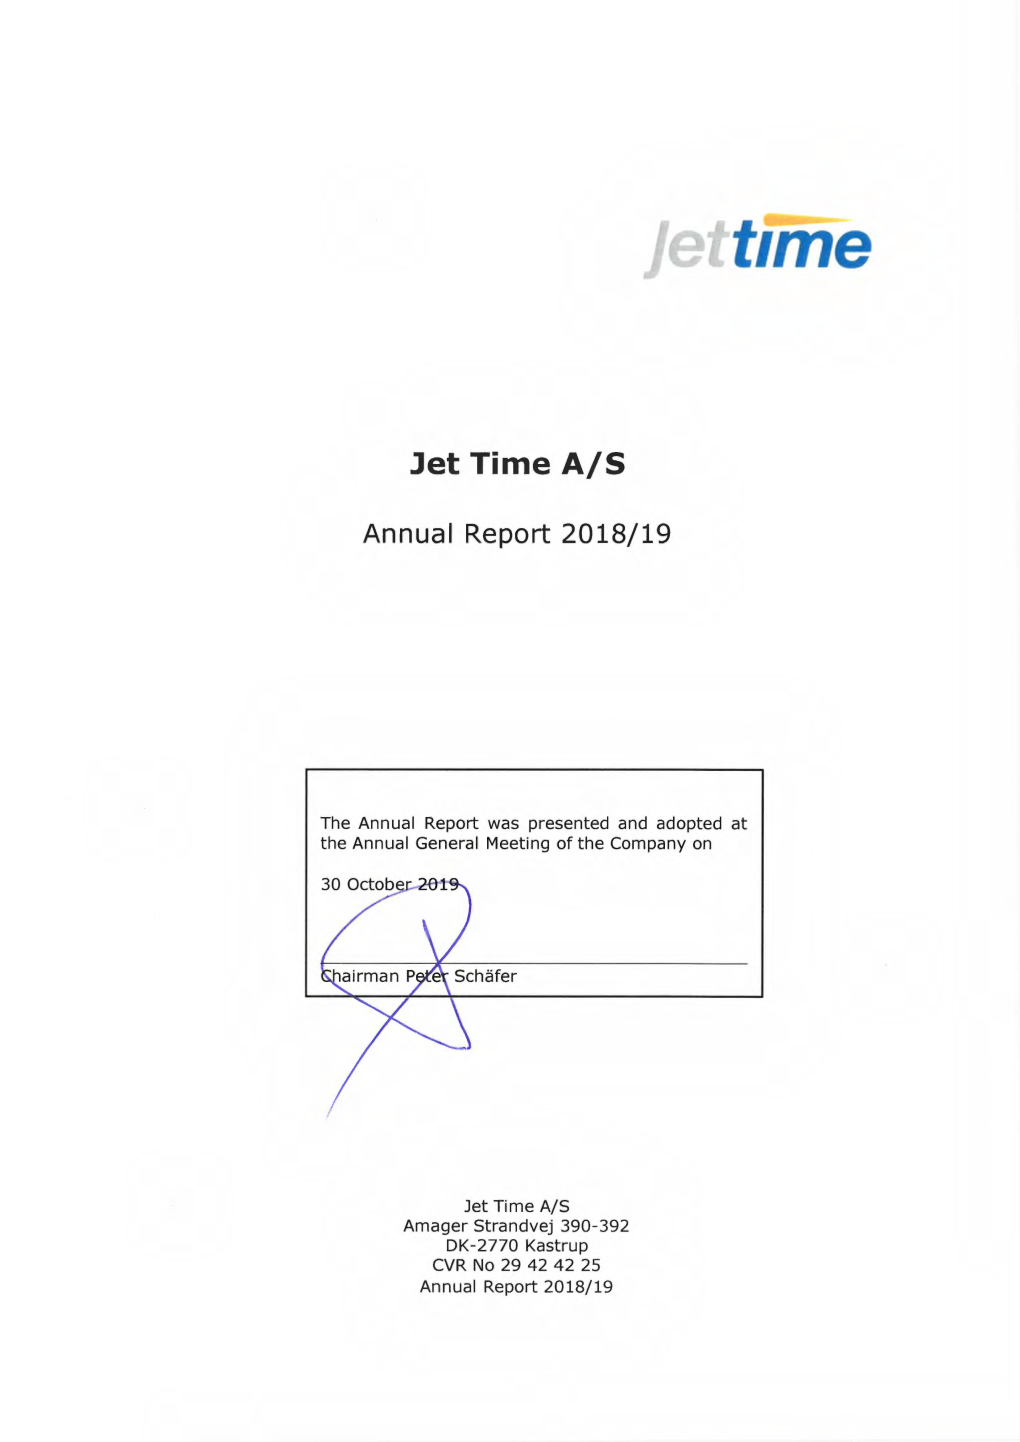 Jet Time A/S